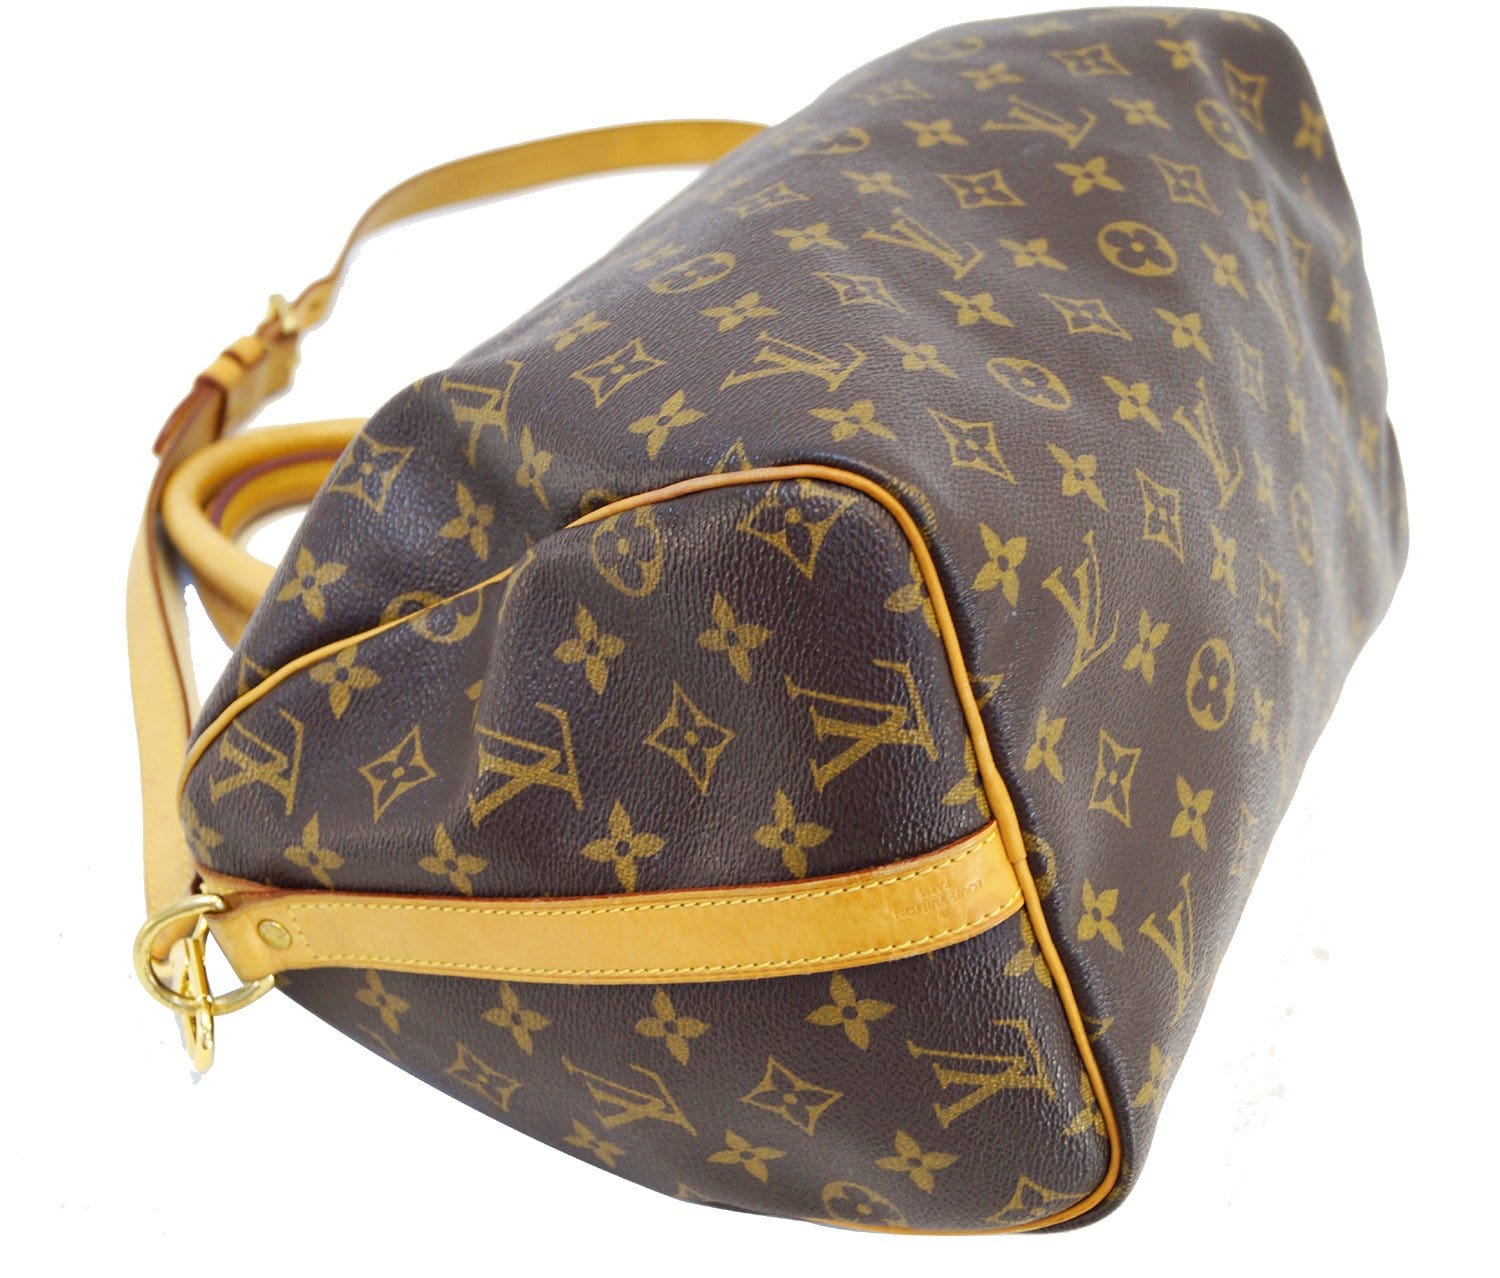 Louis Vuitton Speedy Vs Gucci Boston Bag | Confederated Tribes of the Umatilla Indian Reservation